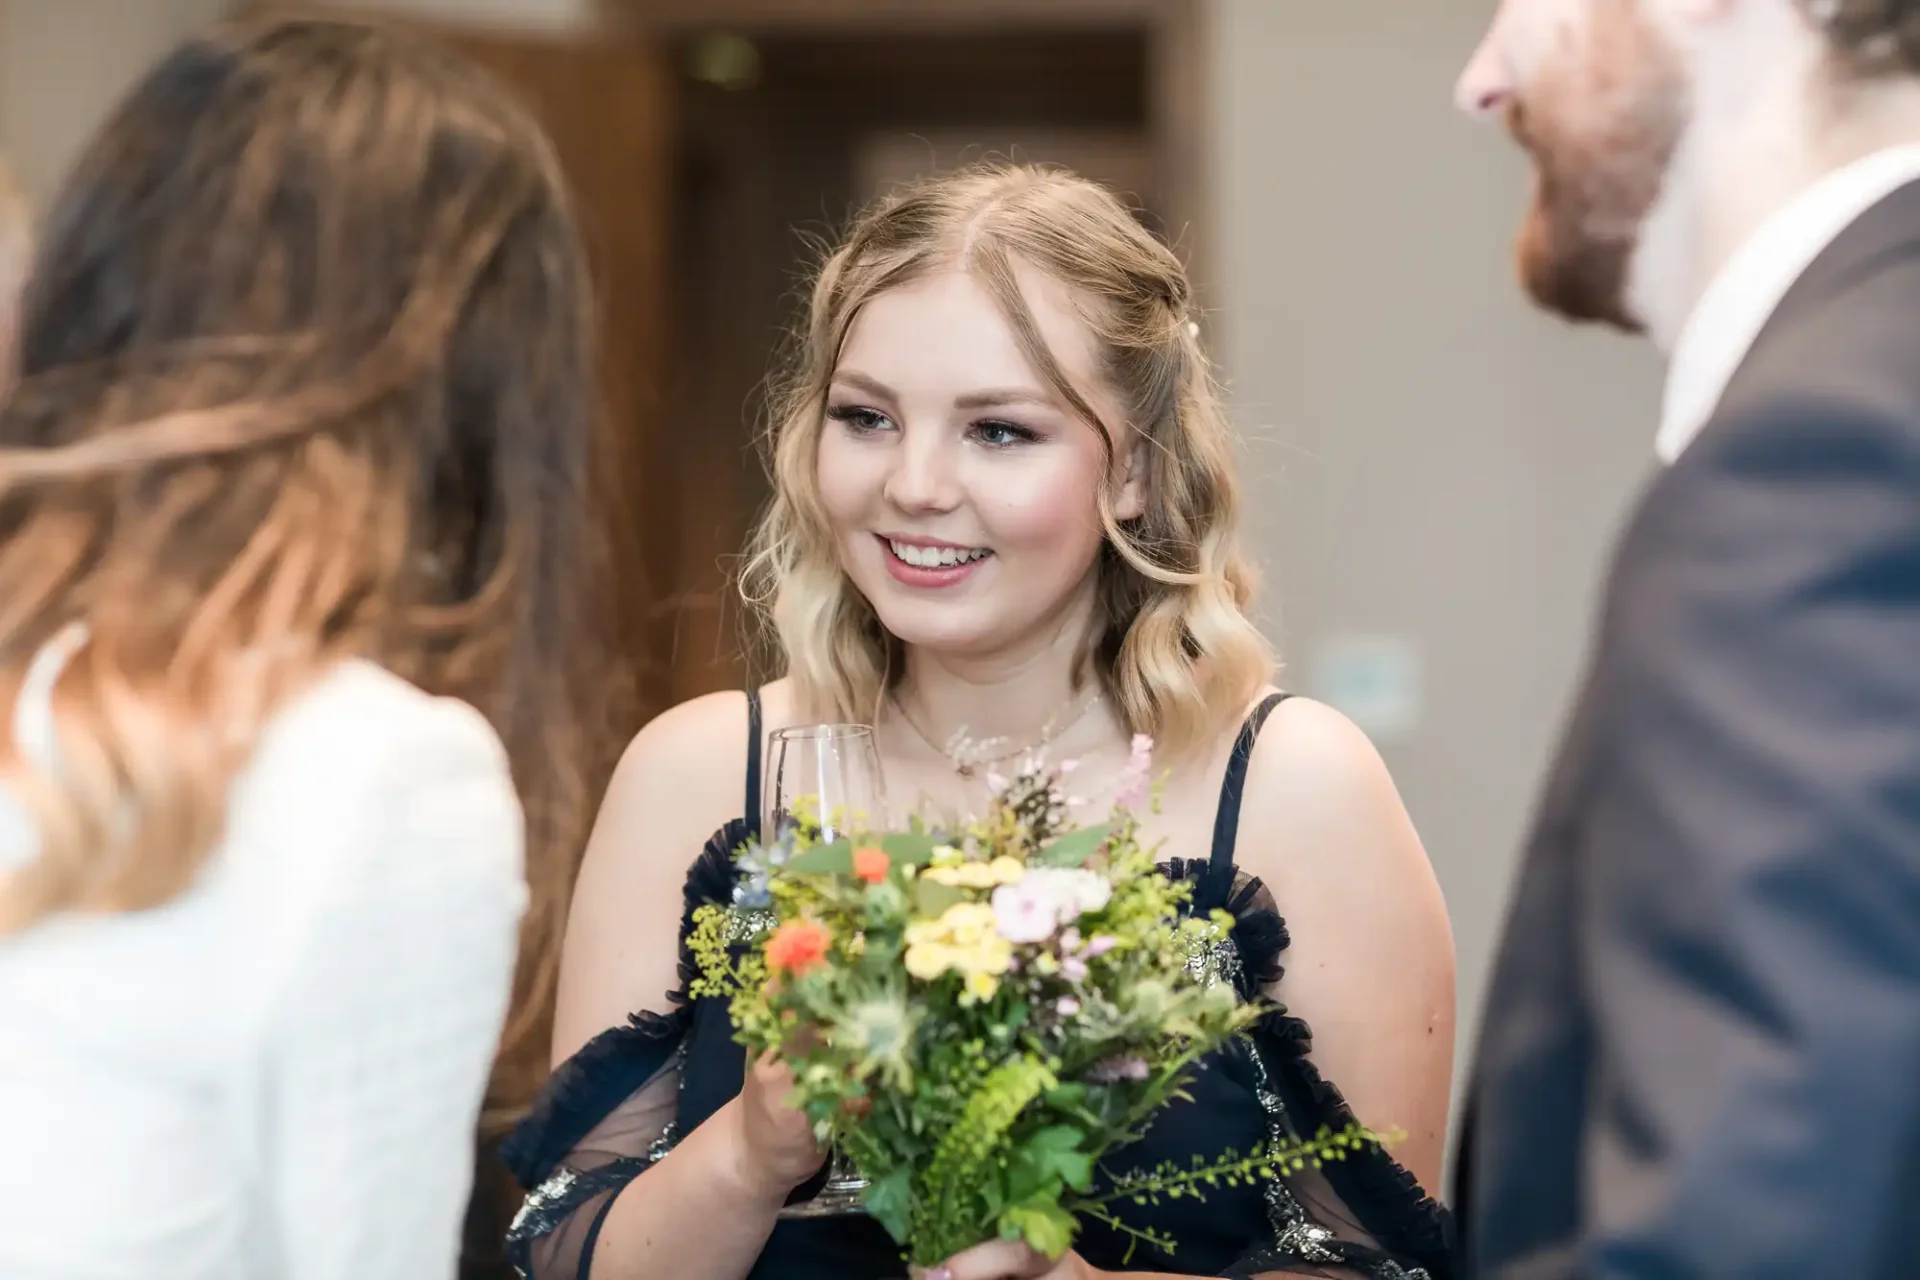 A woman in a black dress holding a bouquet converses with guests at a social event.